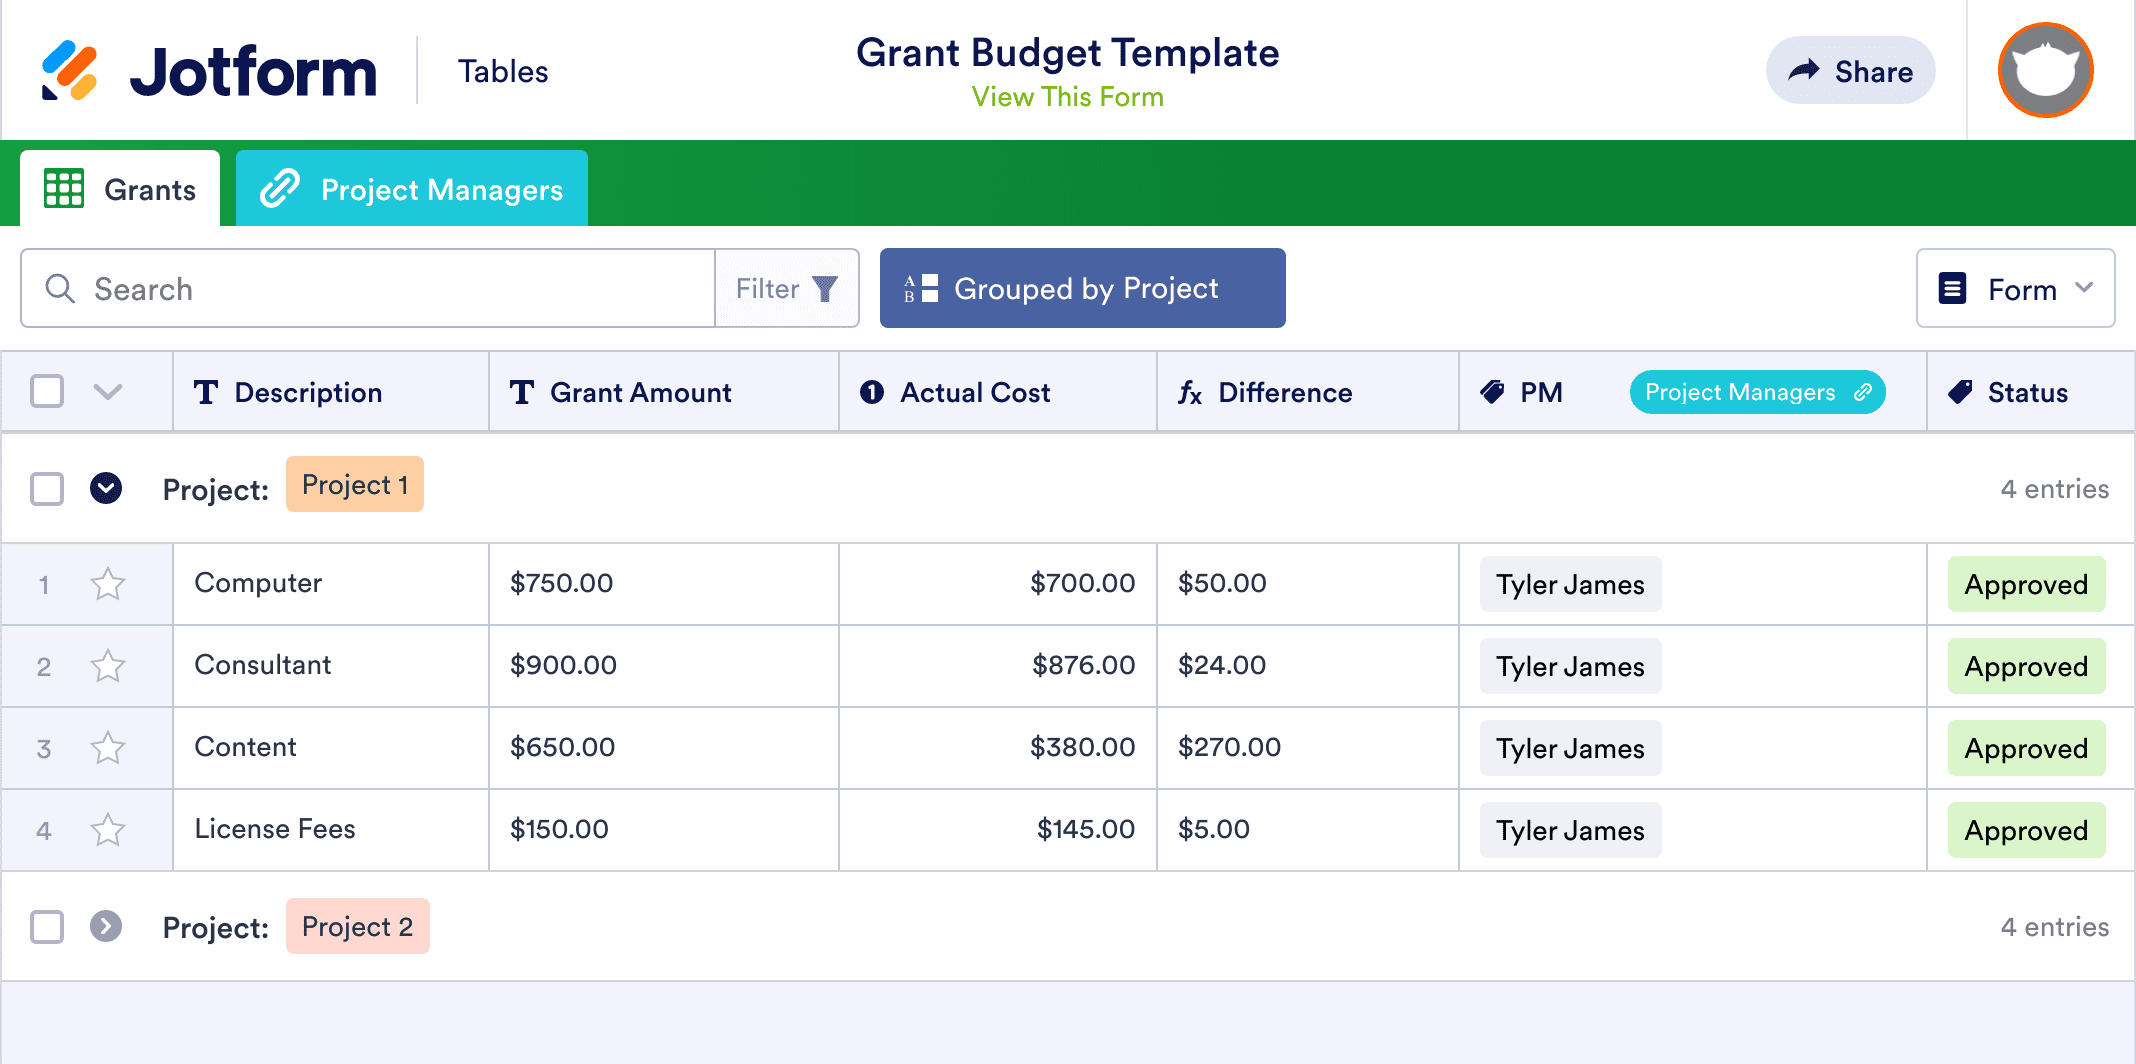 Grant Budget Template